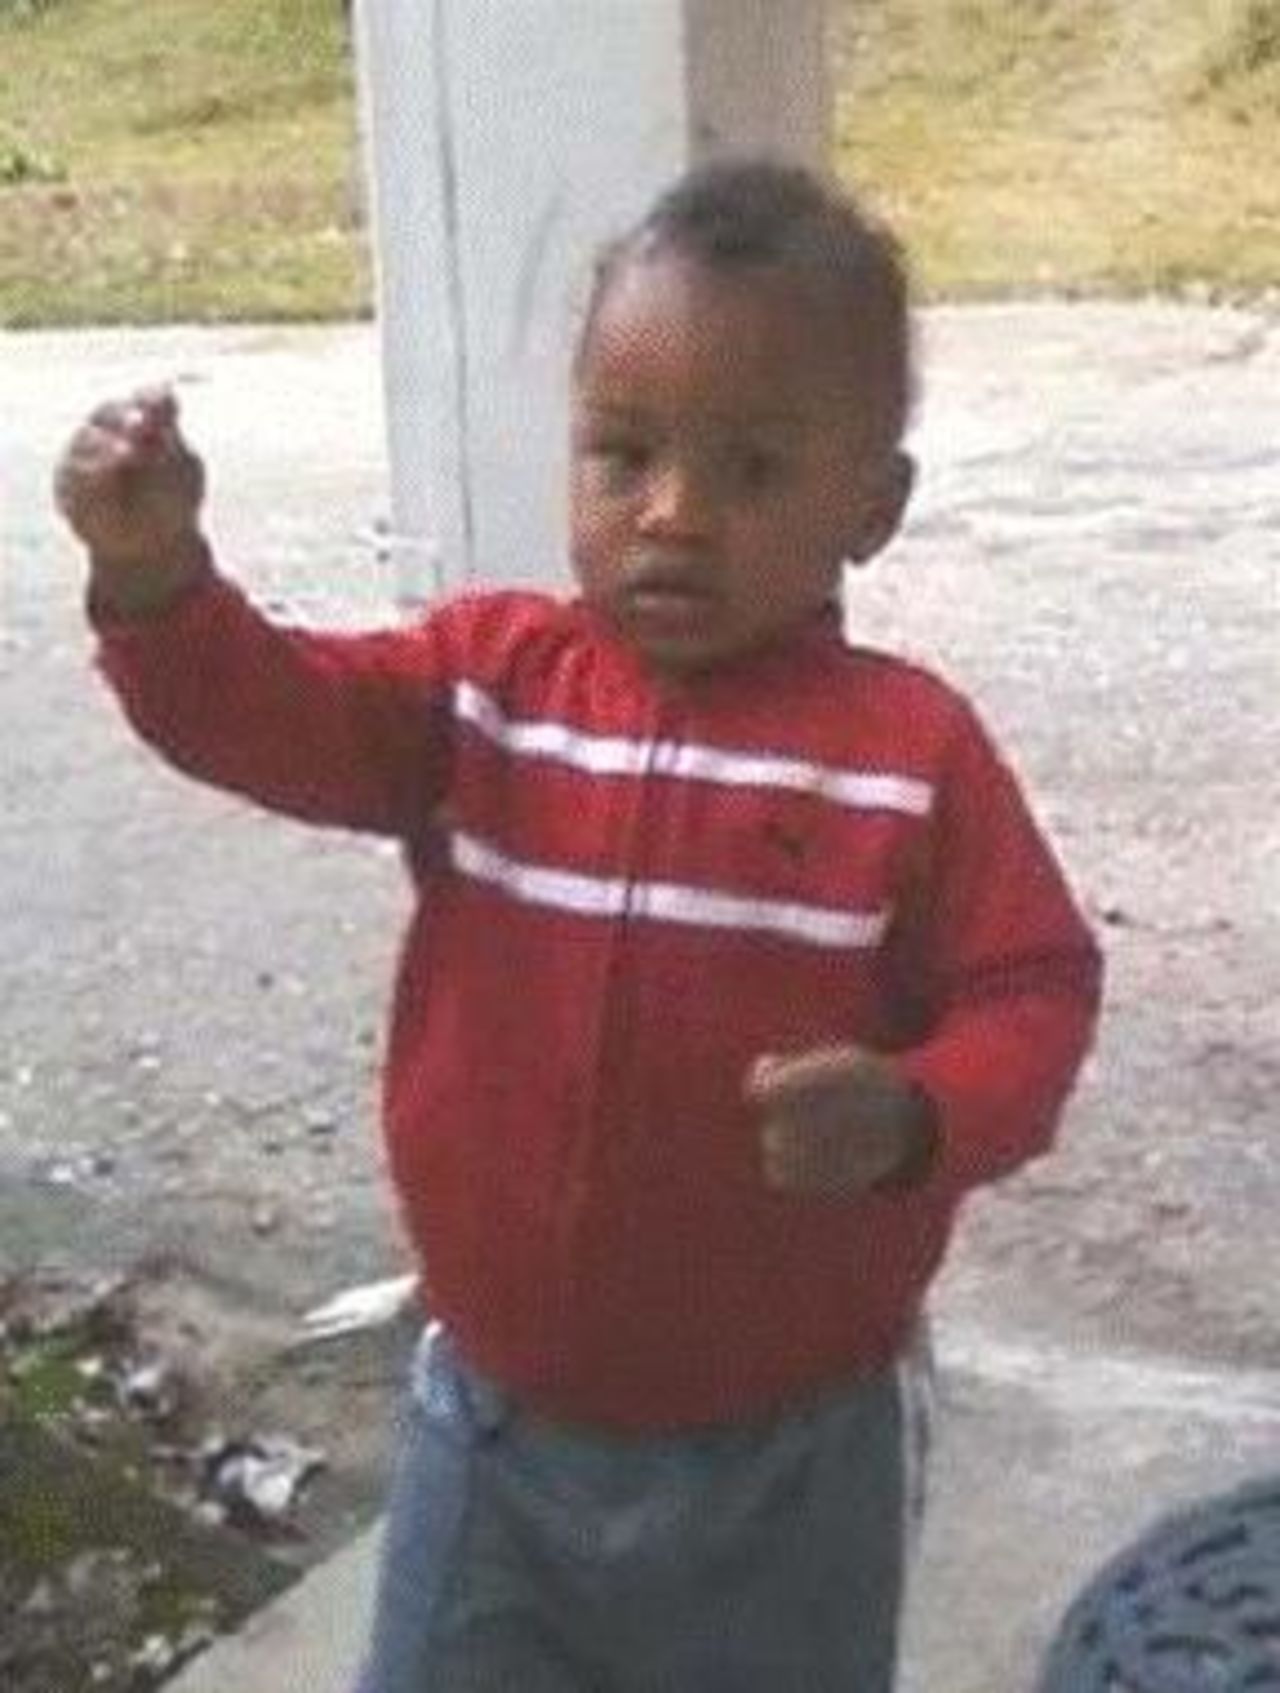 Eighteen-month-old Amir Jennings was last seen with his mother in Columbia, South Carolina, in November 2011. Both were reported missing by a family member in early December 2011. Amir's mother was located a few weeks later after she was involved in a car accident. Amir was not in the car.  Amir's mother has been convicted of being involved in the toddler's disappearance, but the boy has yet to be found.    